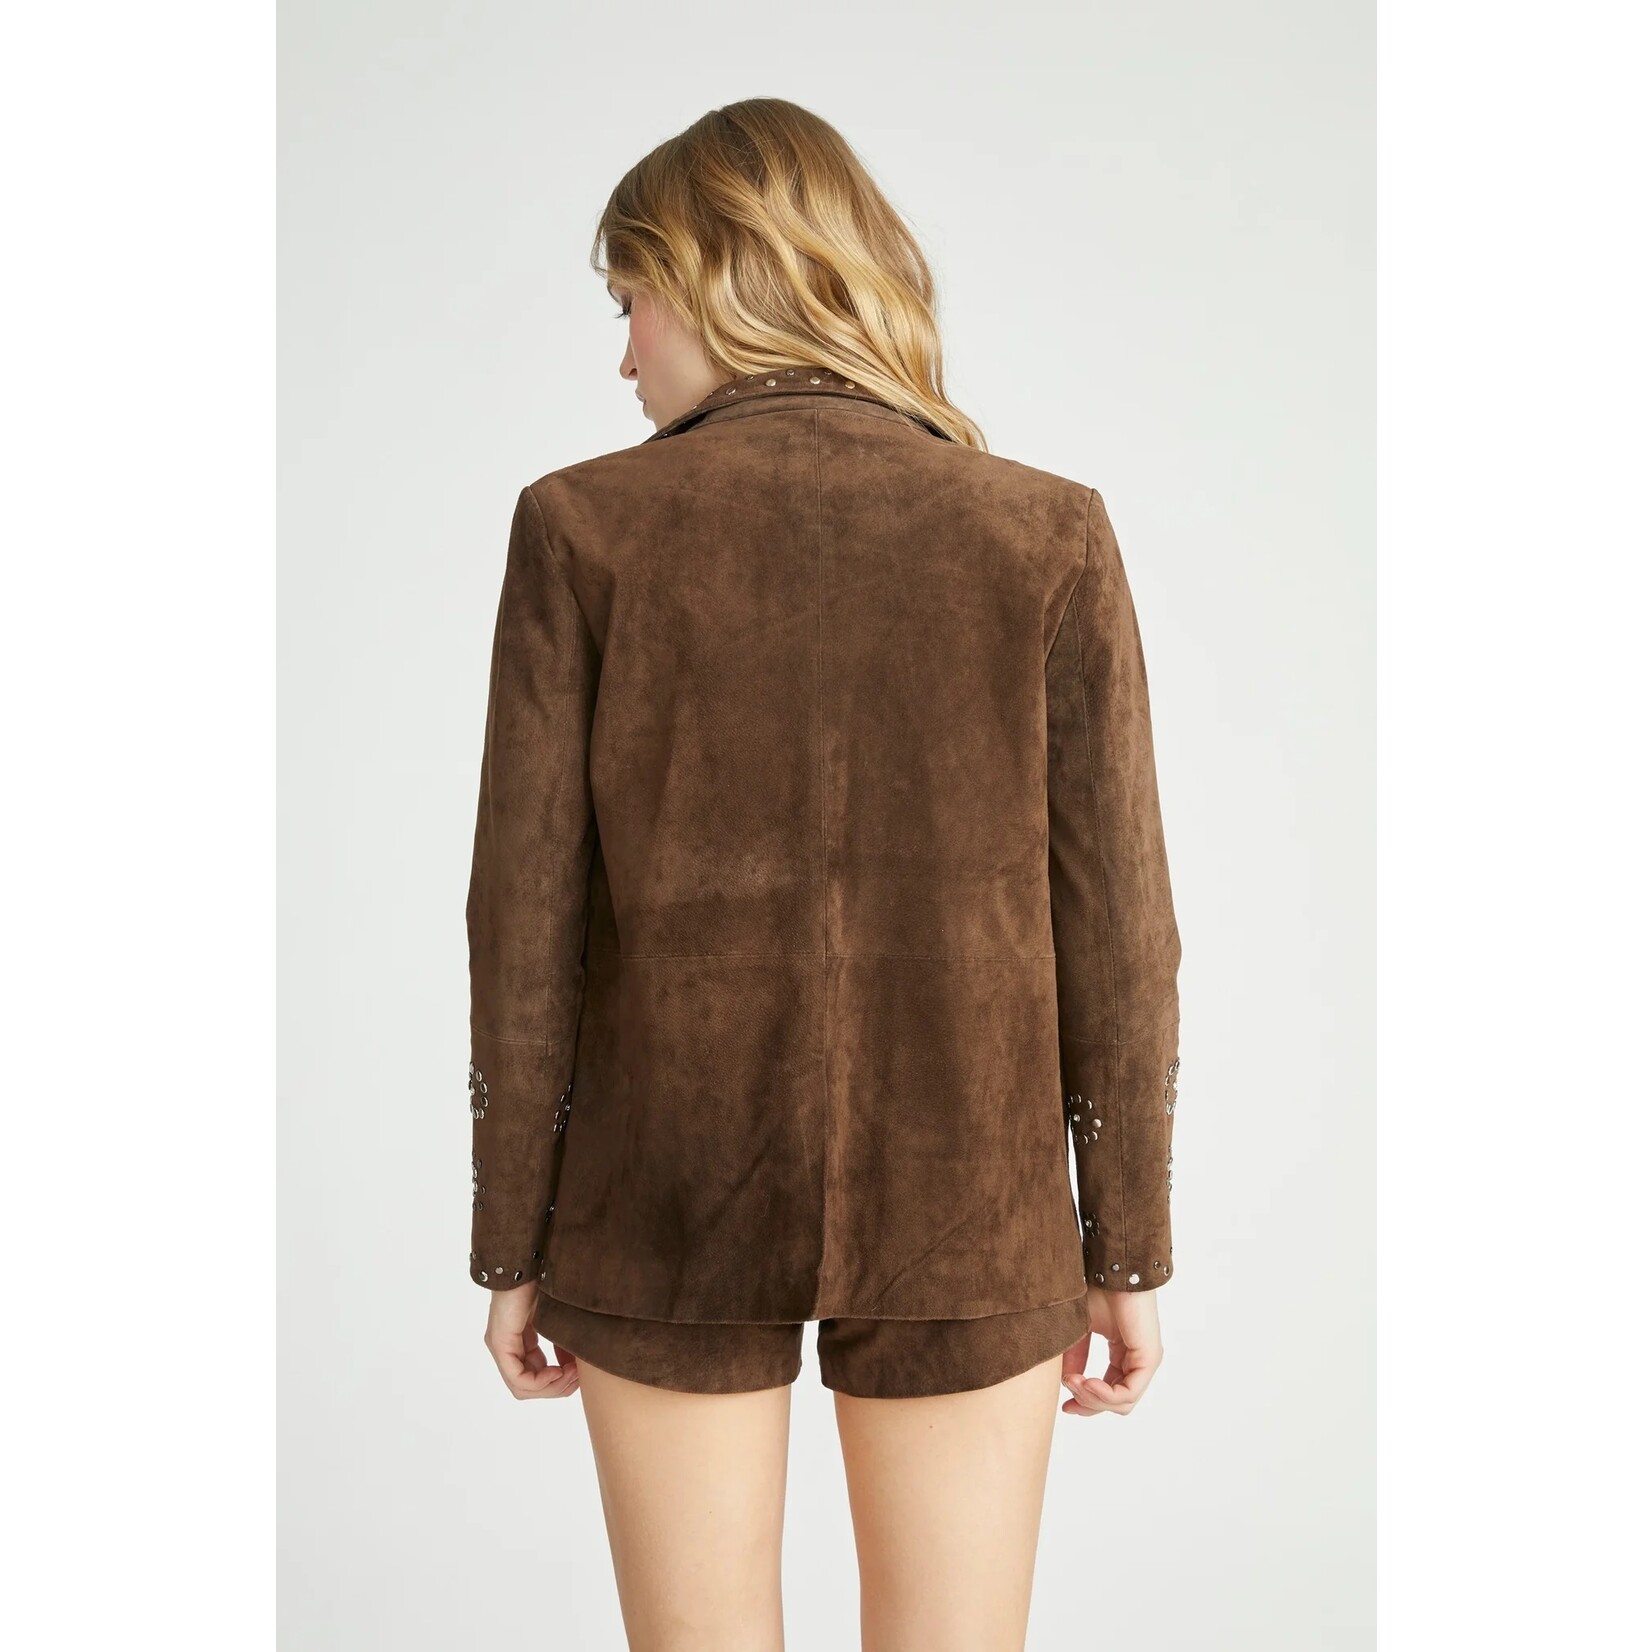 Driftwood Chocolate Suede Studded Jacket